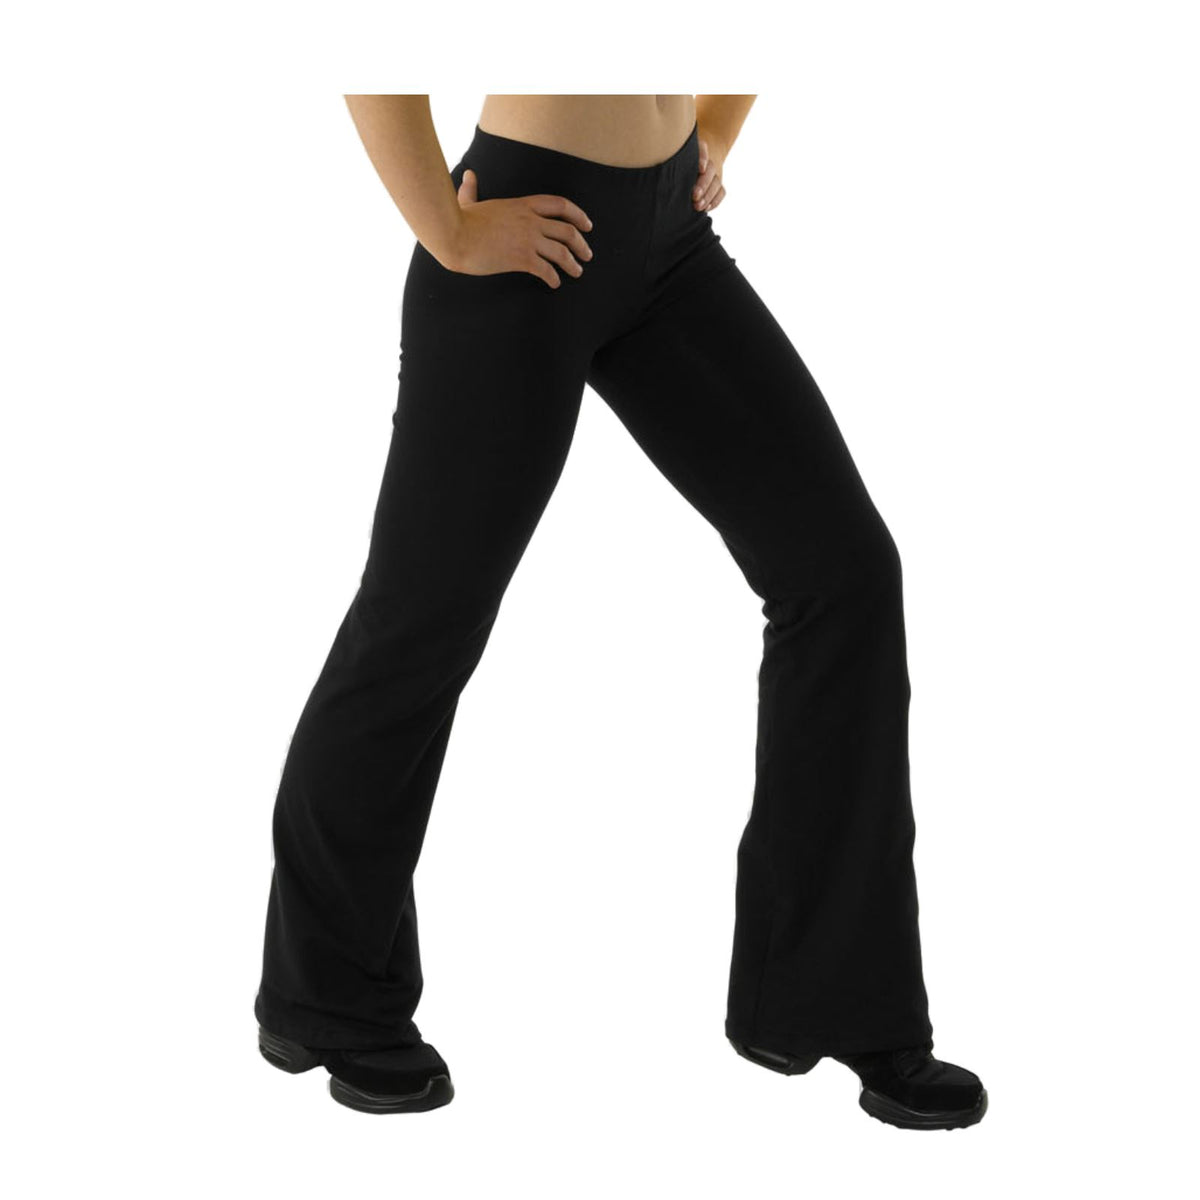 TAPPERS & POINTERS COTTON LYCRA HIPSTER JAZZ PANTS - FLARED LEG - Click ...